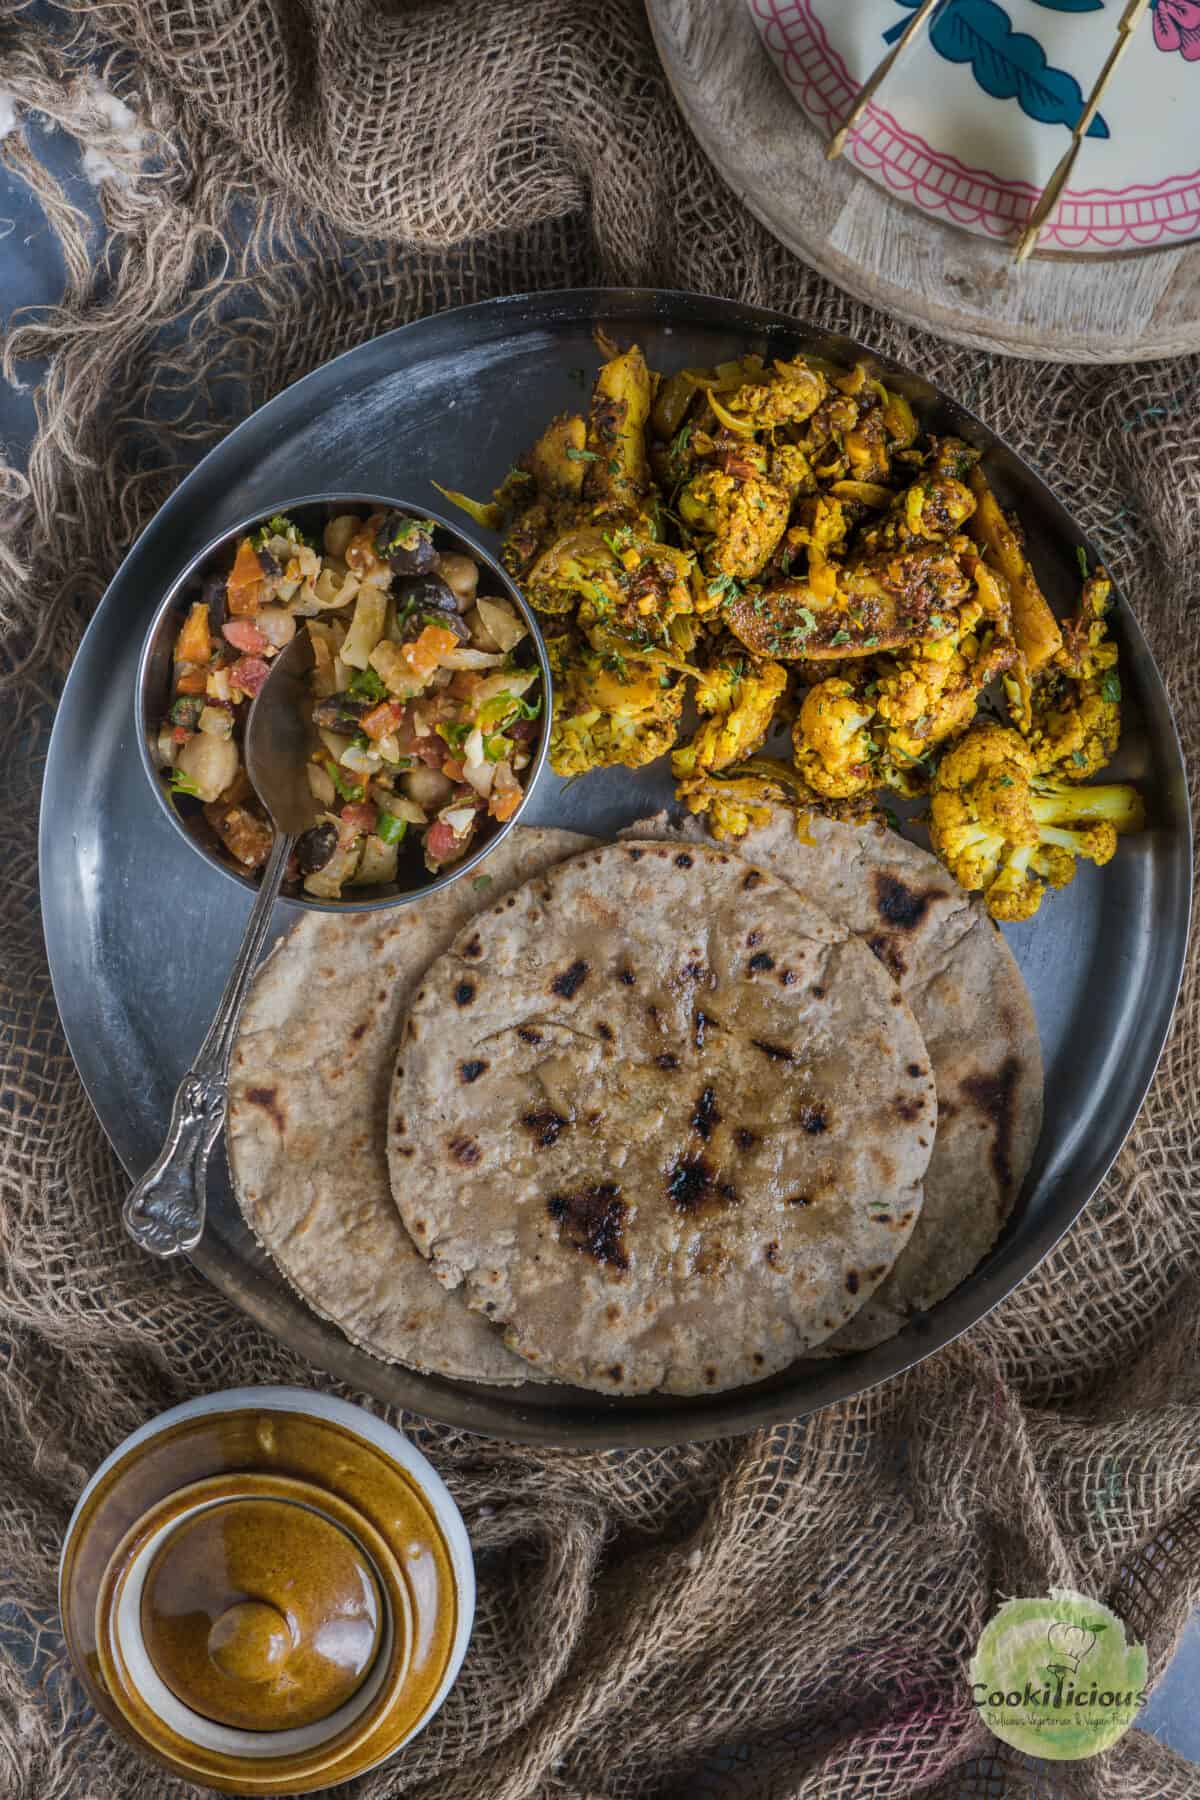 An Indian platter with gluten-free roti, salad and curry.